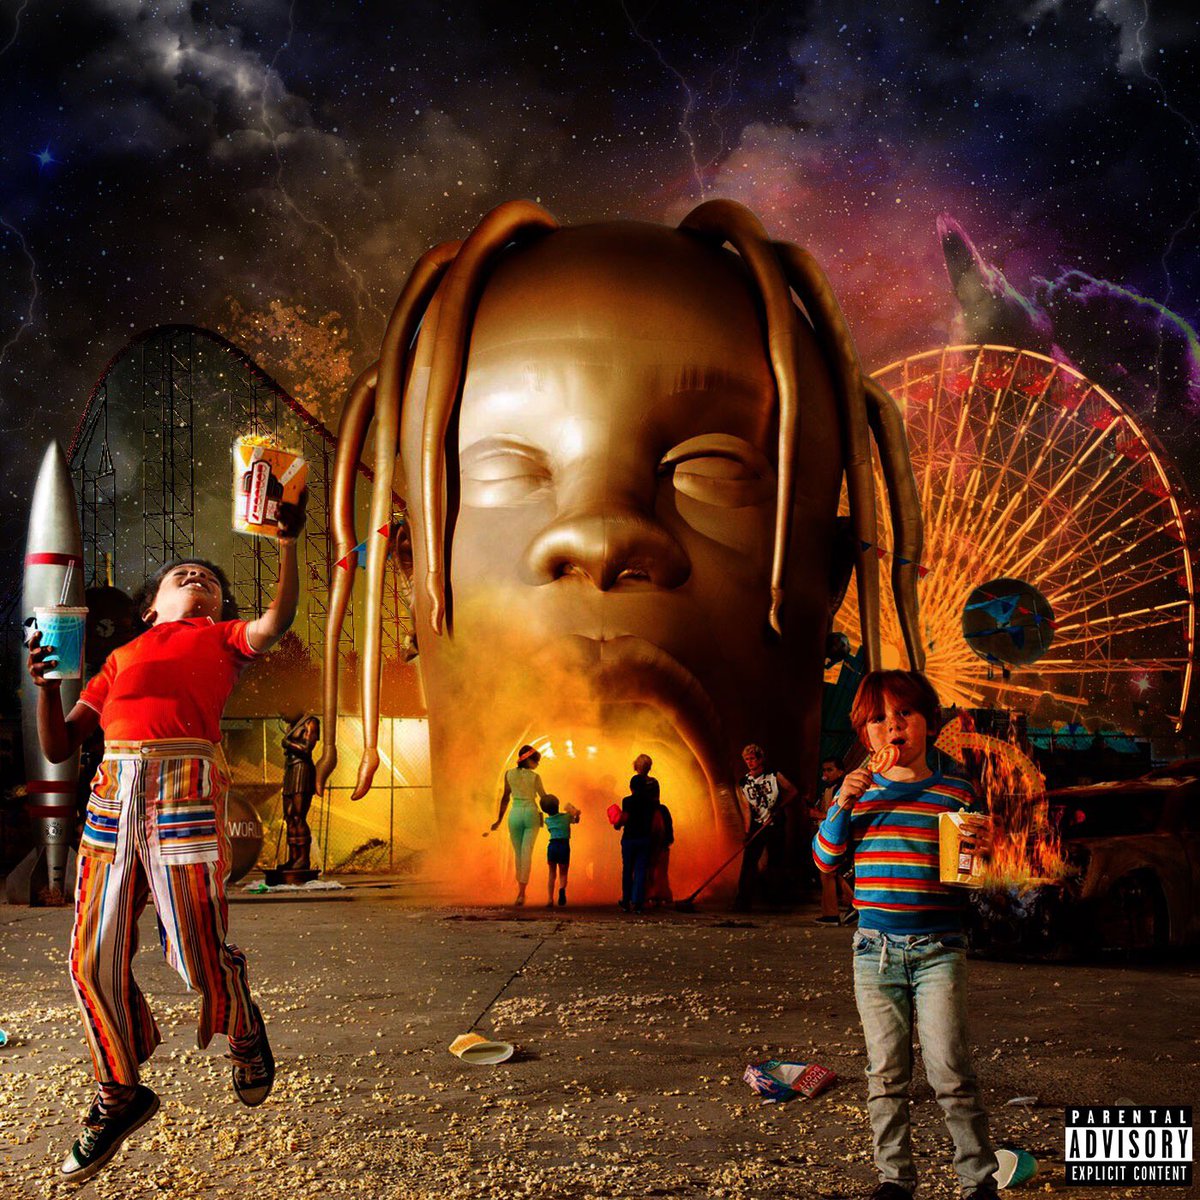 Astroworld is the third album released by the Rapper Travis Scott